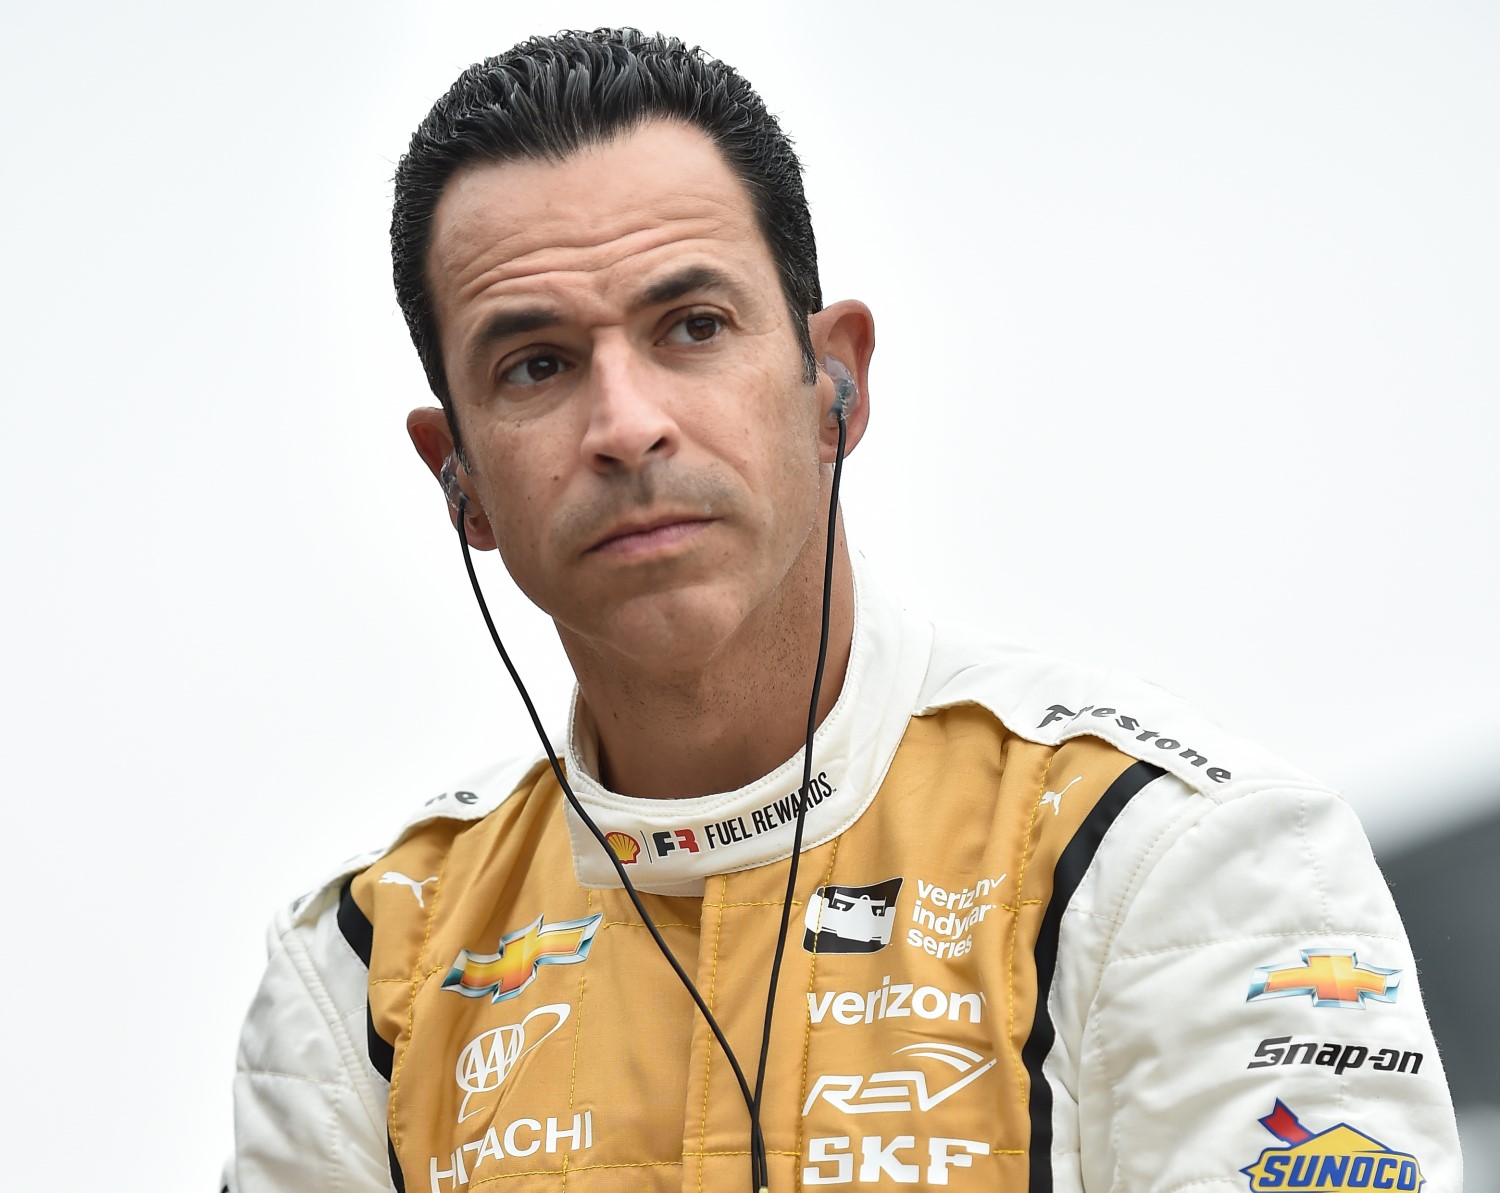 Castroneves shows the youngsters how it's done